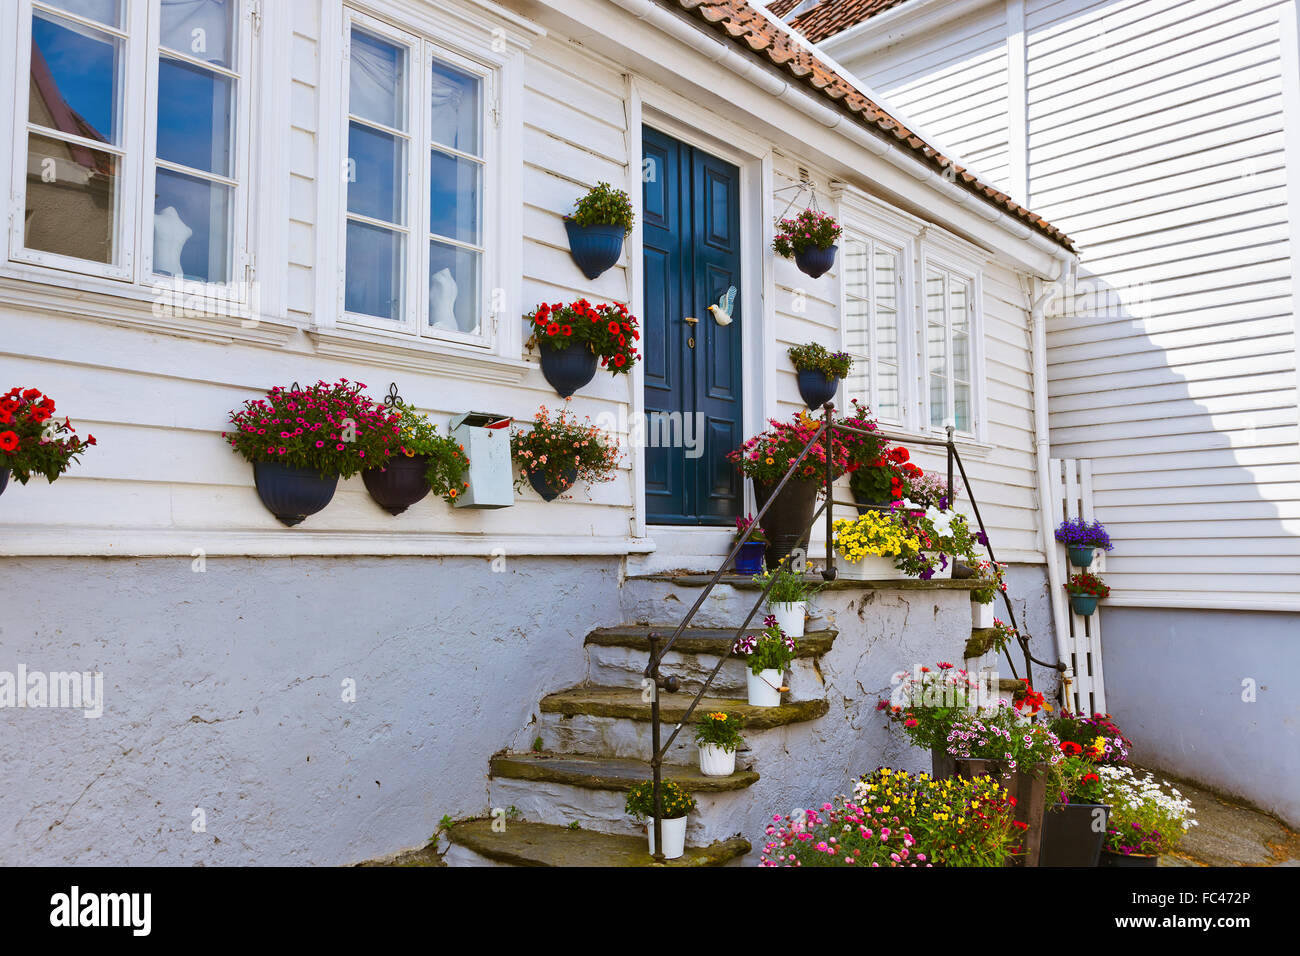 Old centre of Stavanger - Norway Stock Photo